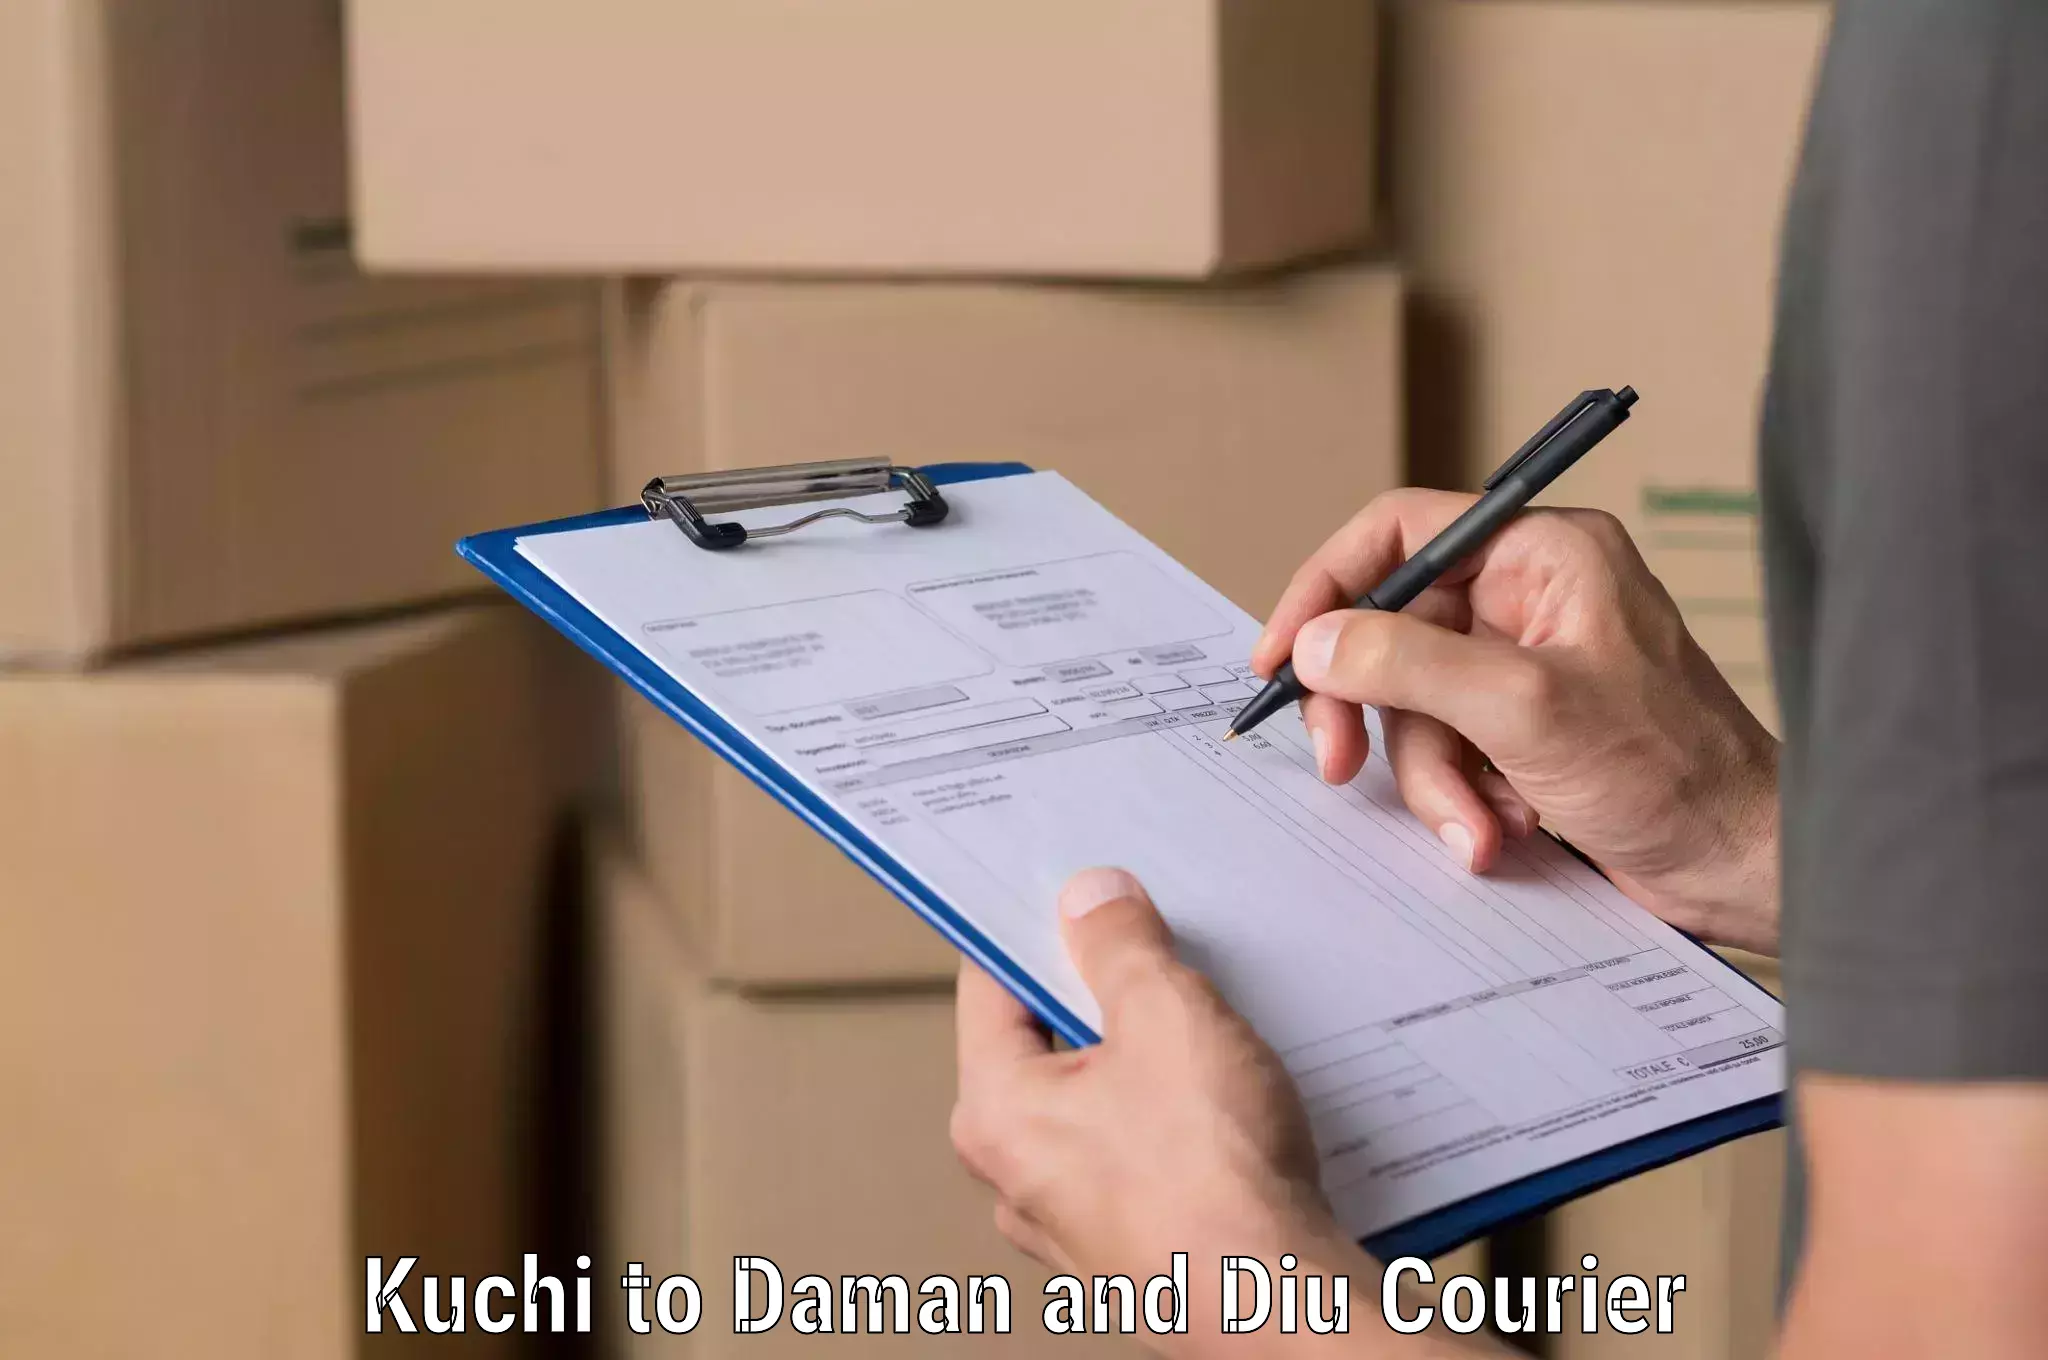 State-of-the-art courier technology in Kuchi to Daman